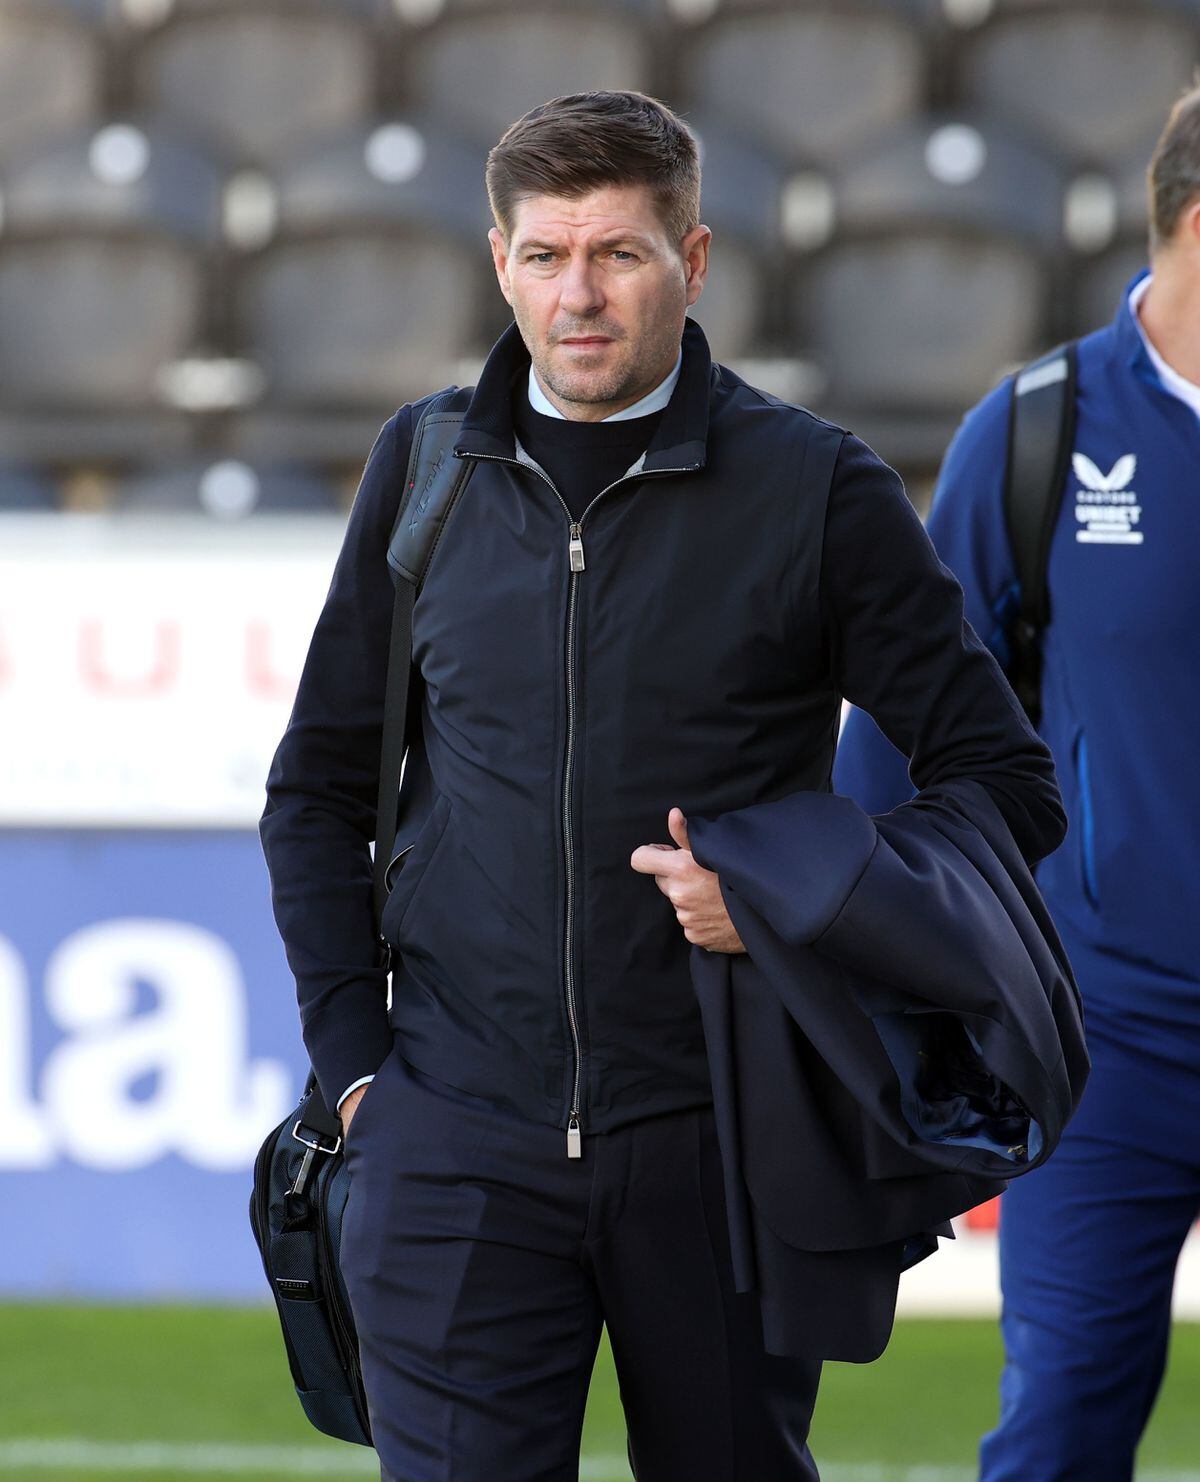 Rangers manager Steven Gerrard prior to the Scottish Premiership match at St Mirren Park, Paisley. Picture date: Sunday October 24, 2021. PA Photo. See PA story SOCCER St Mirren. Photo credit should read: Steve Welsh/PA Wire...RESTRICTIONS: Use subject to restrictions. Editorial use only, no commercial use without prior consent from rights holder..